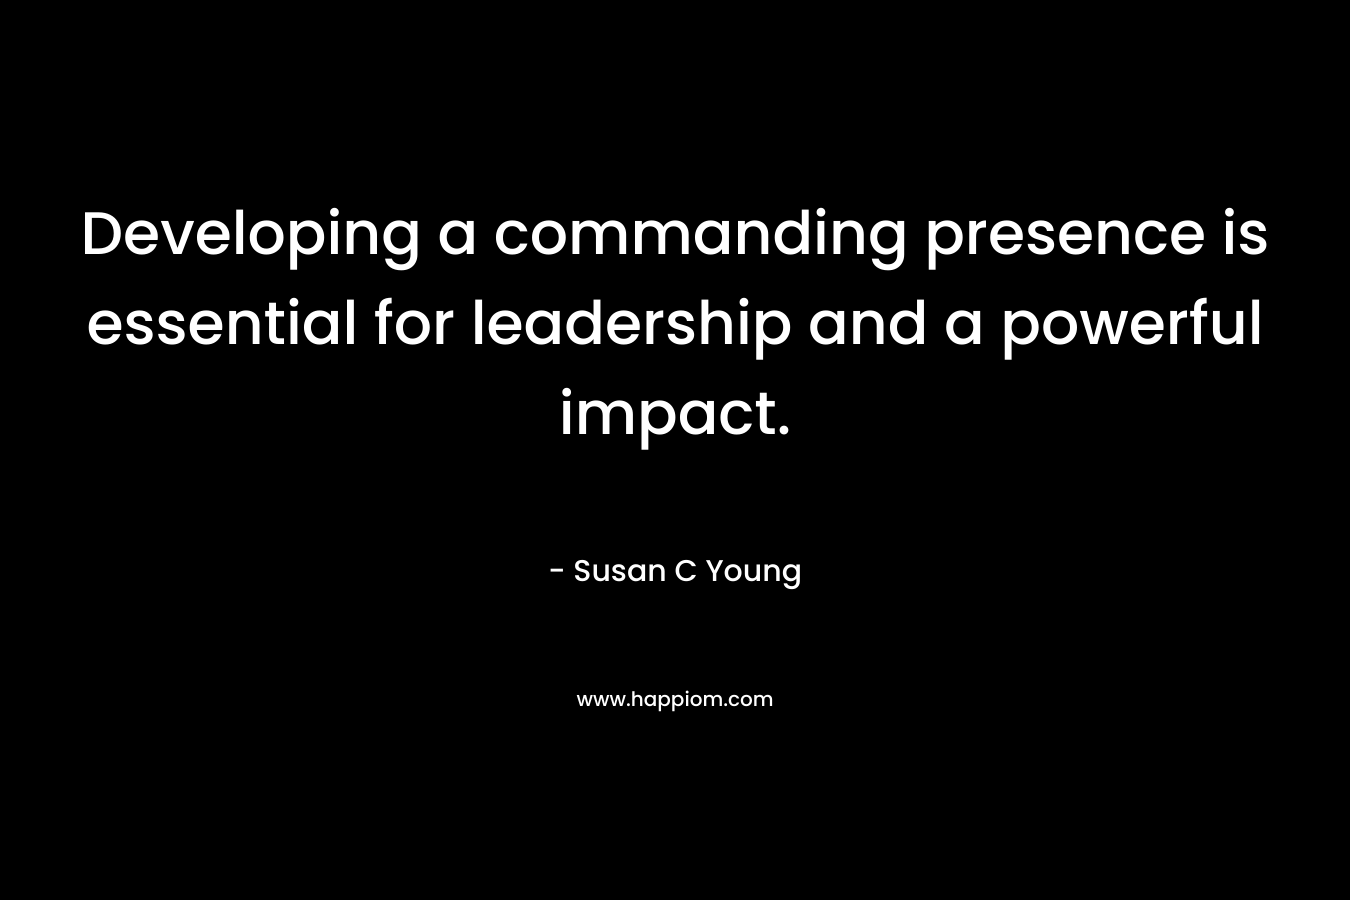 Developing a commanding presence is essential for leadership and a powerful impact. – Susan C Young